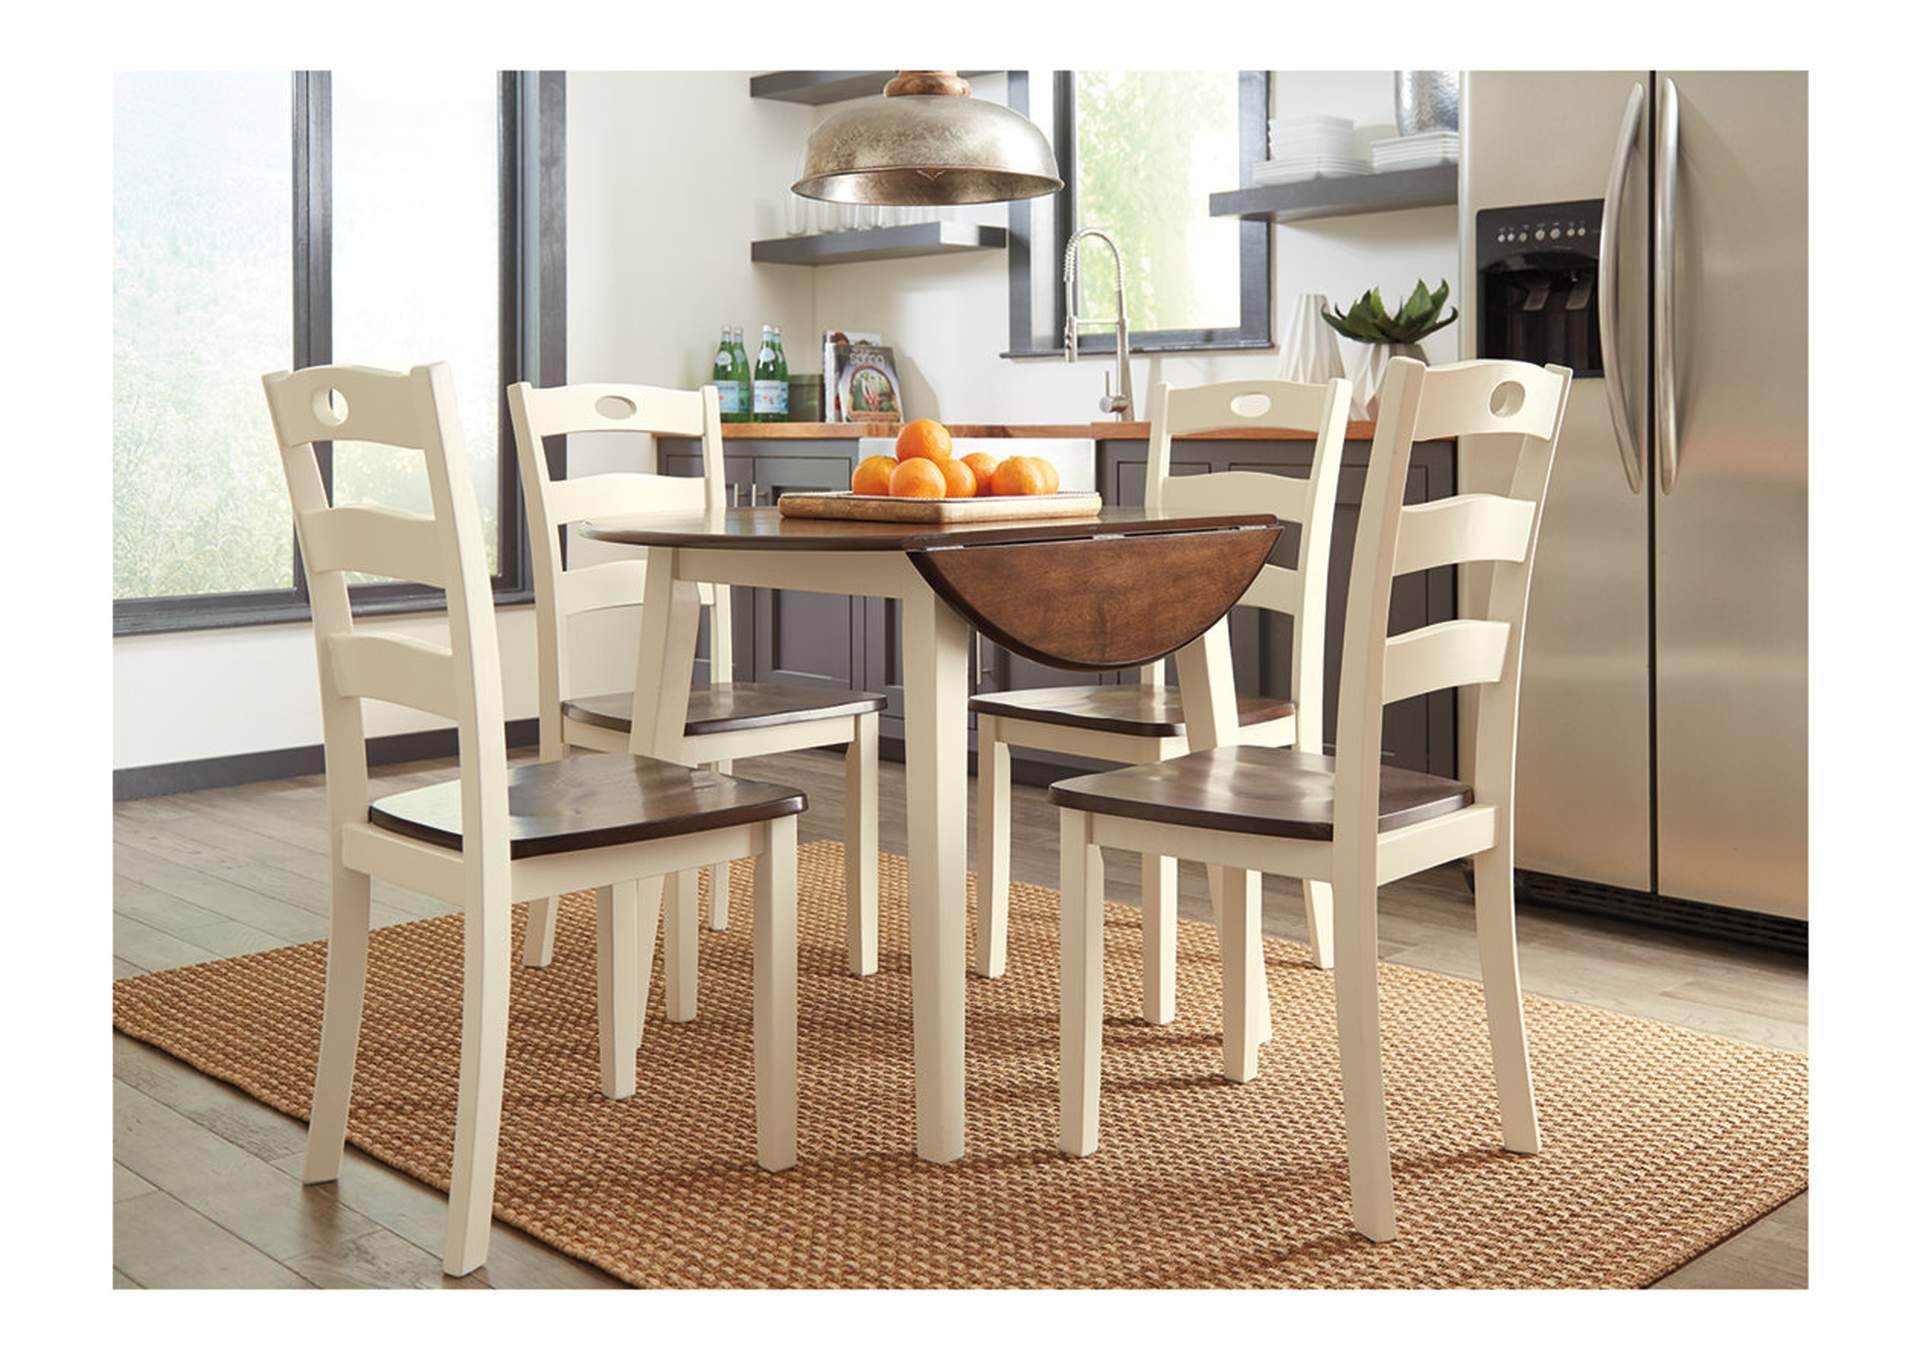 Woodanville Dining Table with 4 Chairs,Signature Design By Ashley